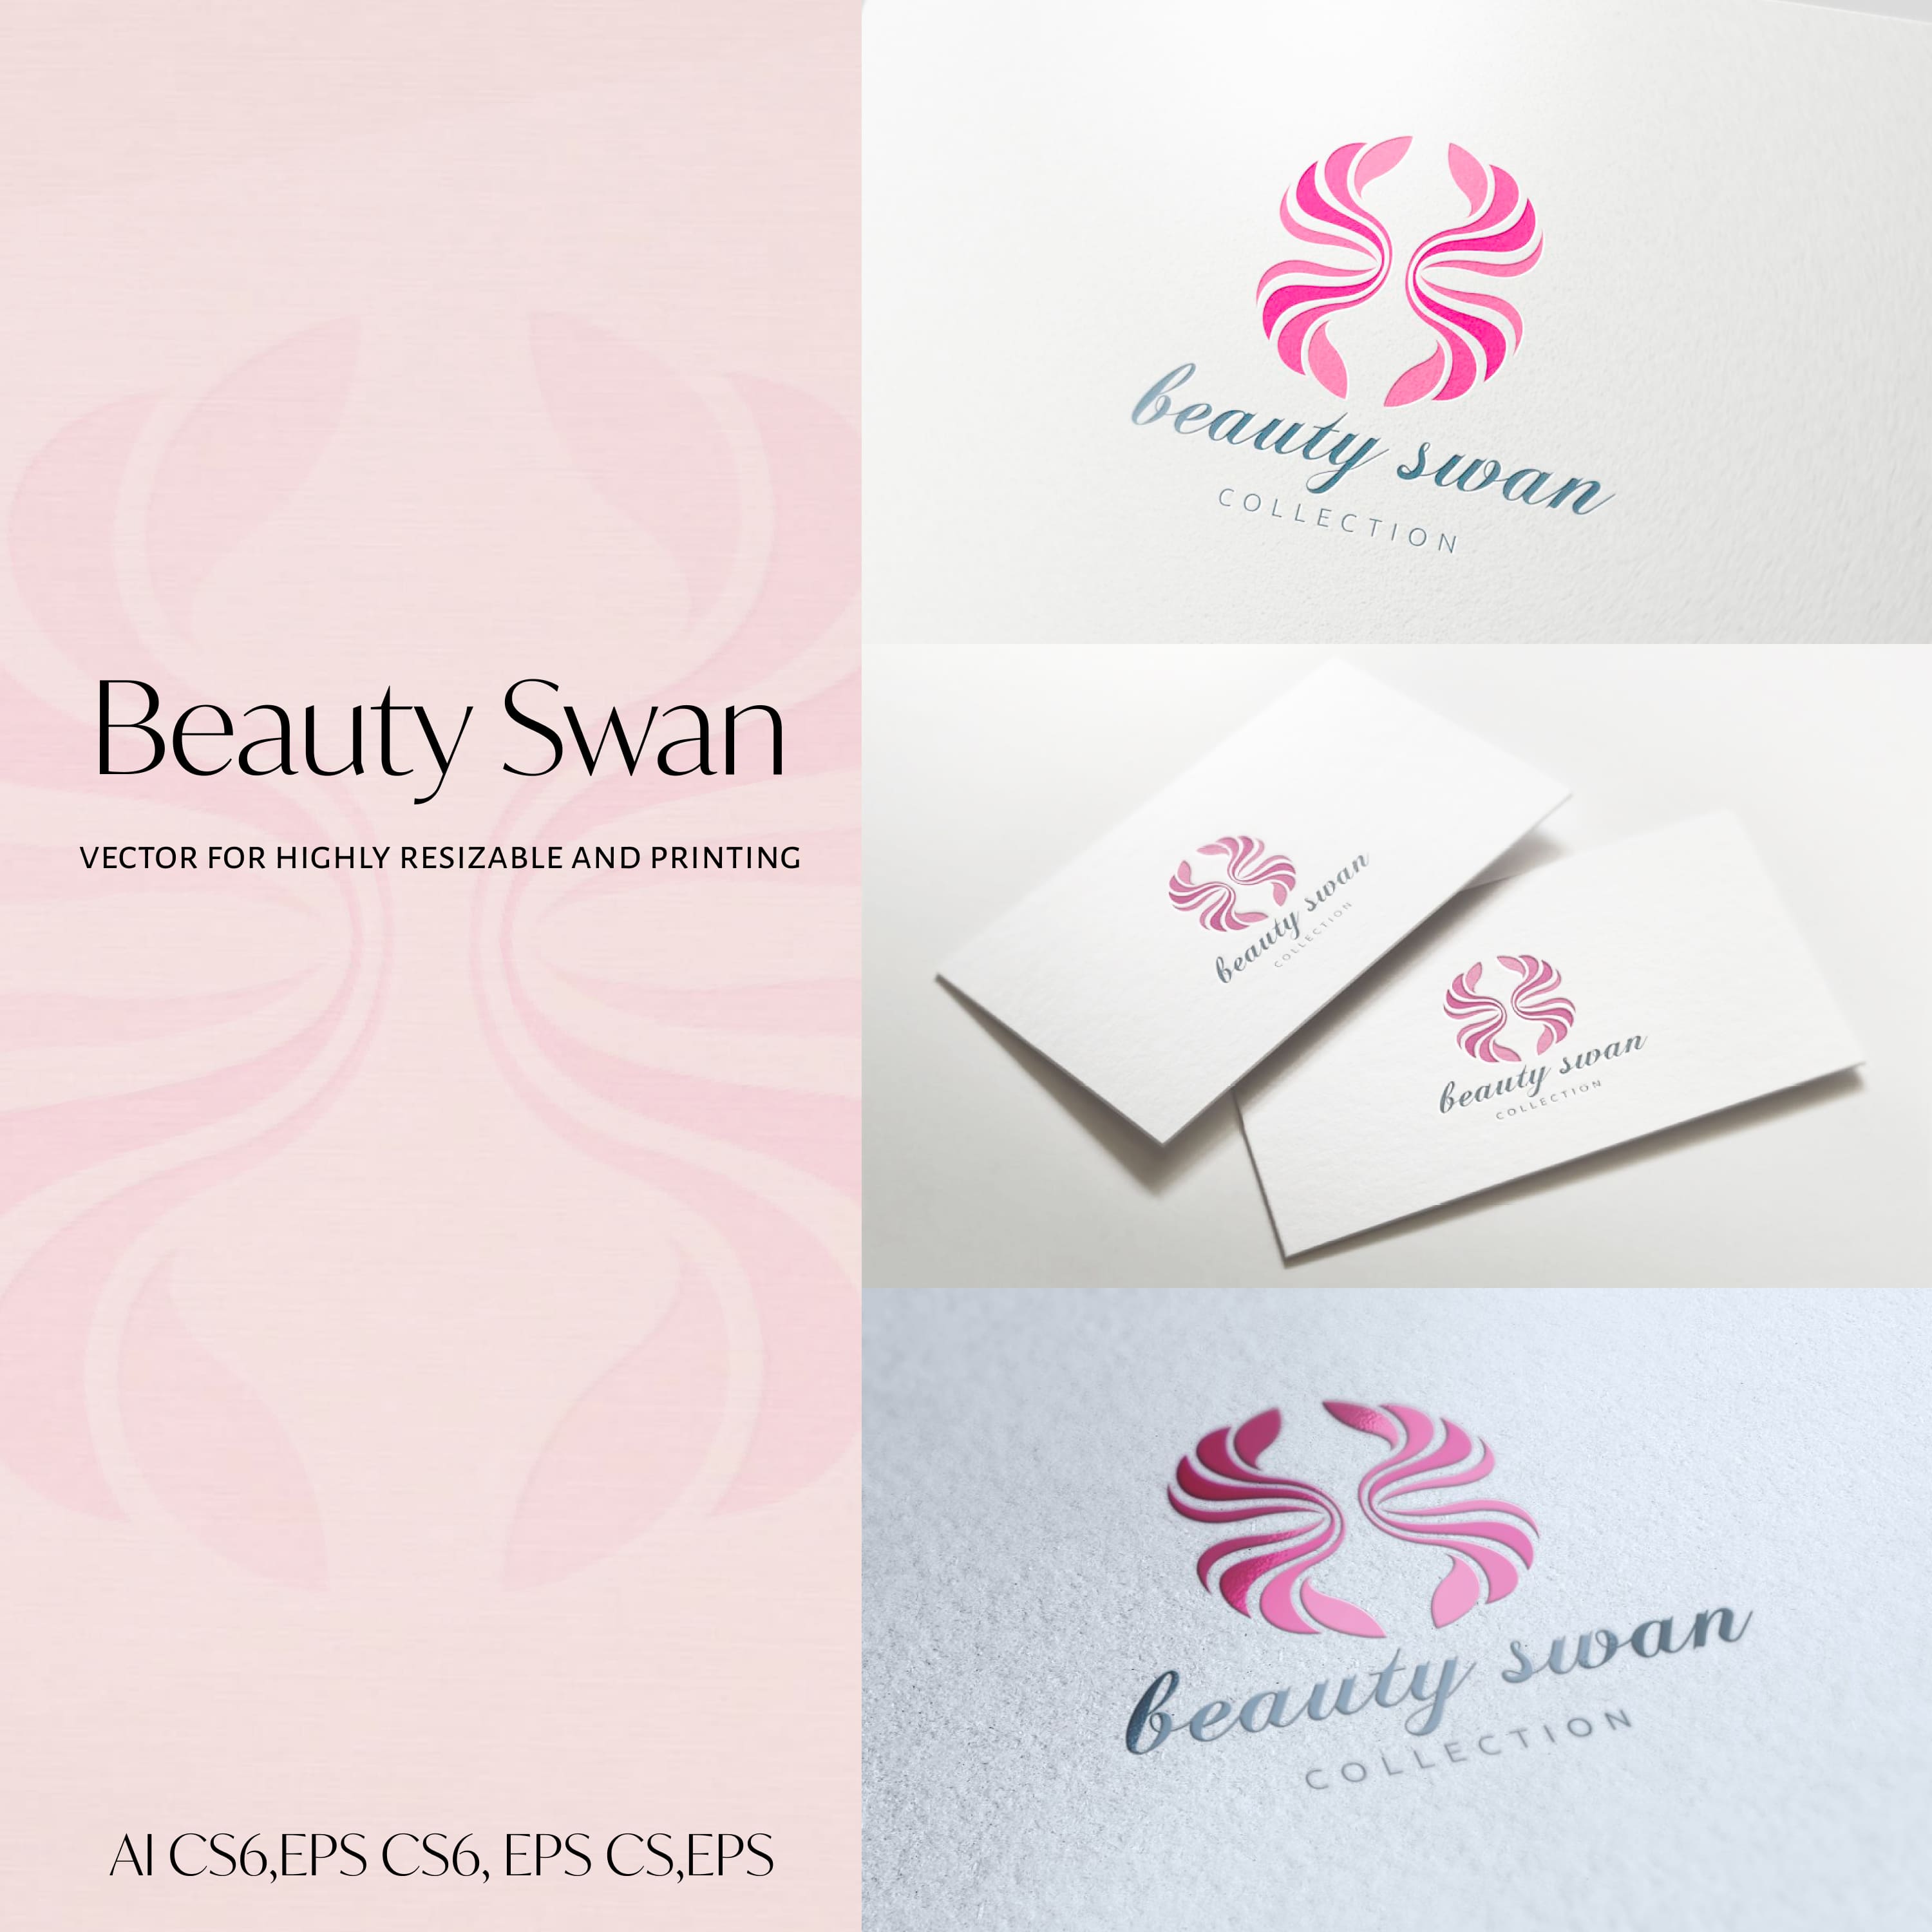 Beauty Swan cover.